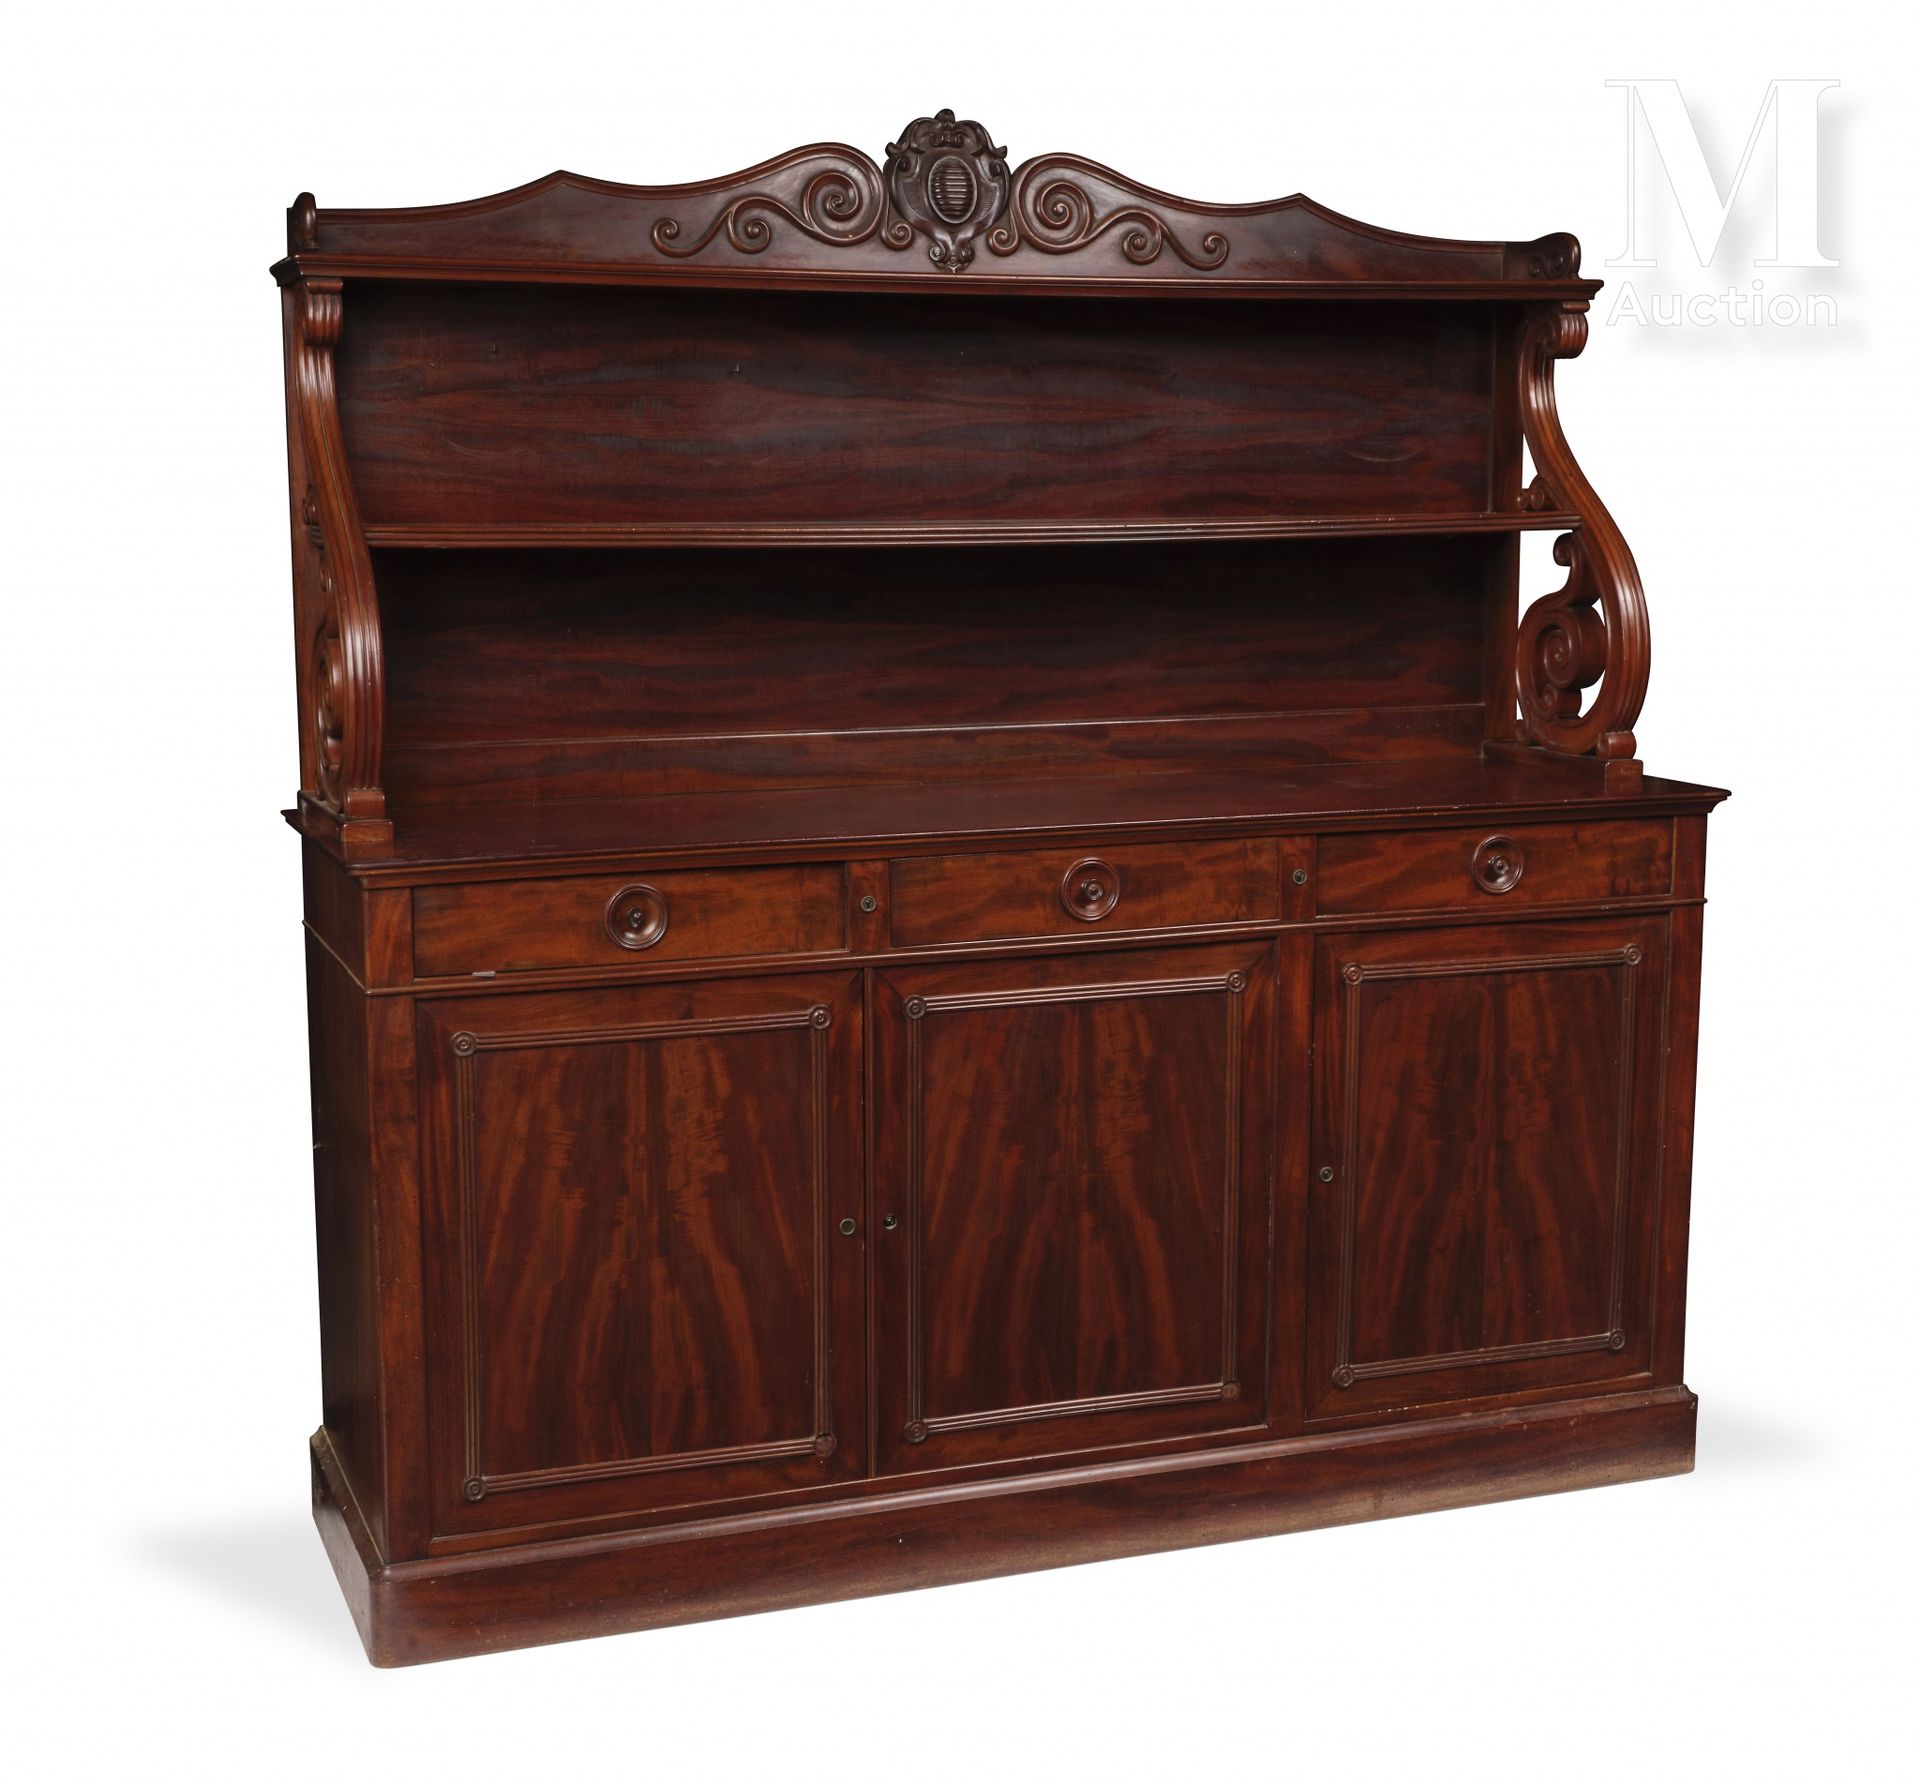 Buffet formant desserte in mahogany and mahogany veneer. The lower part opens wi&hellip;